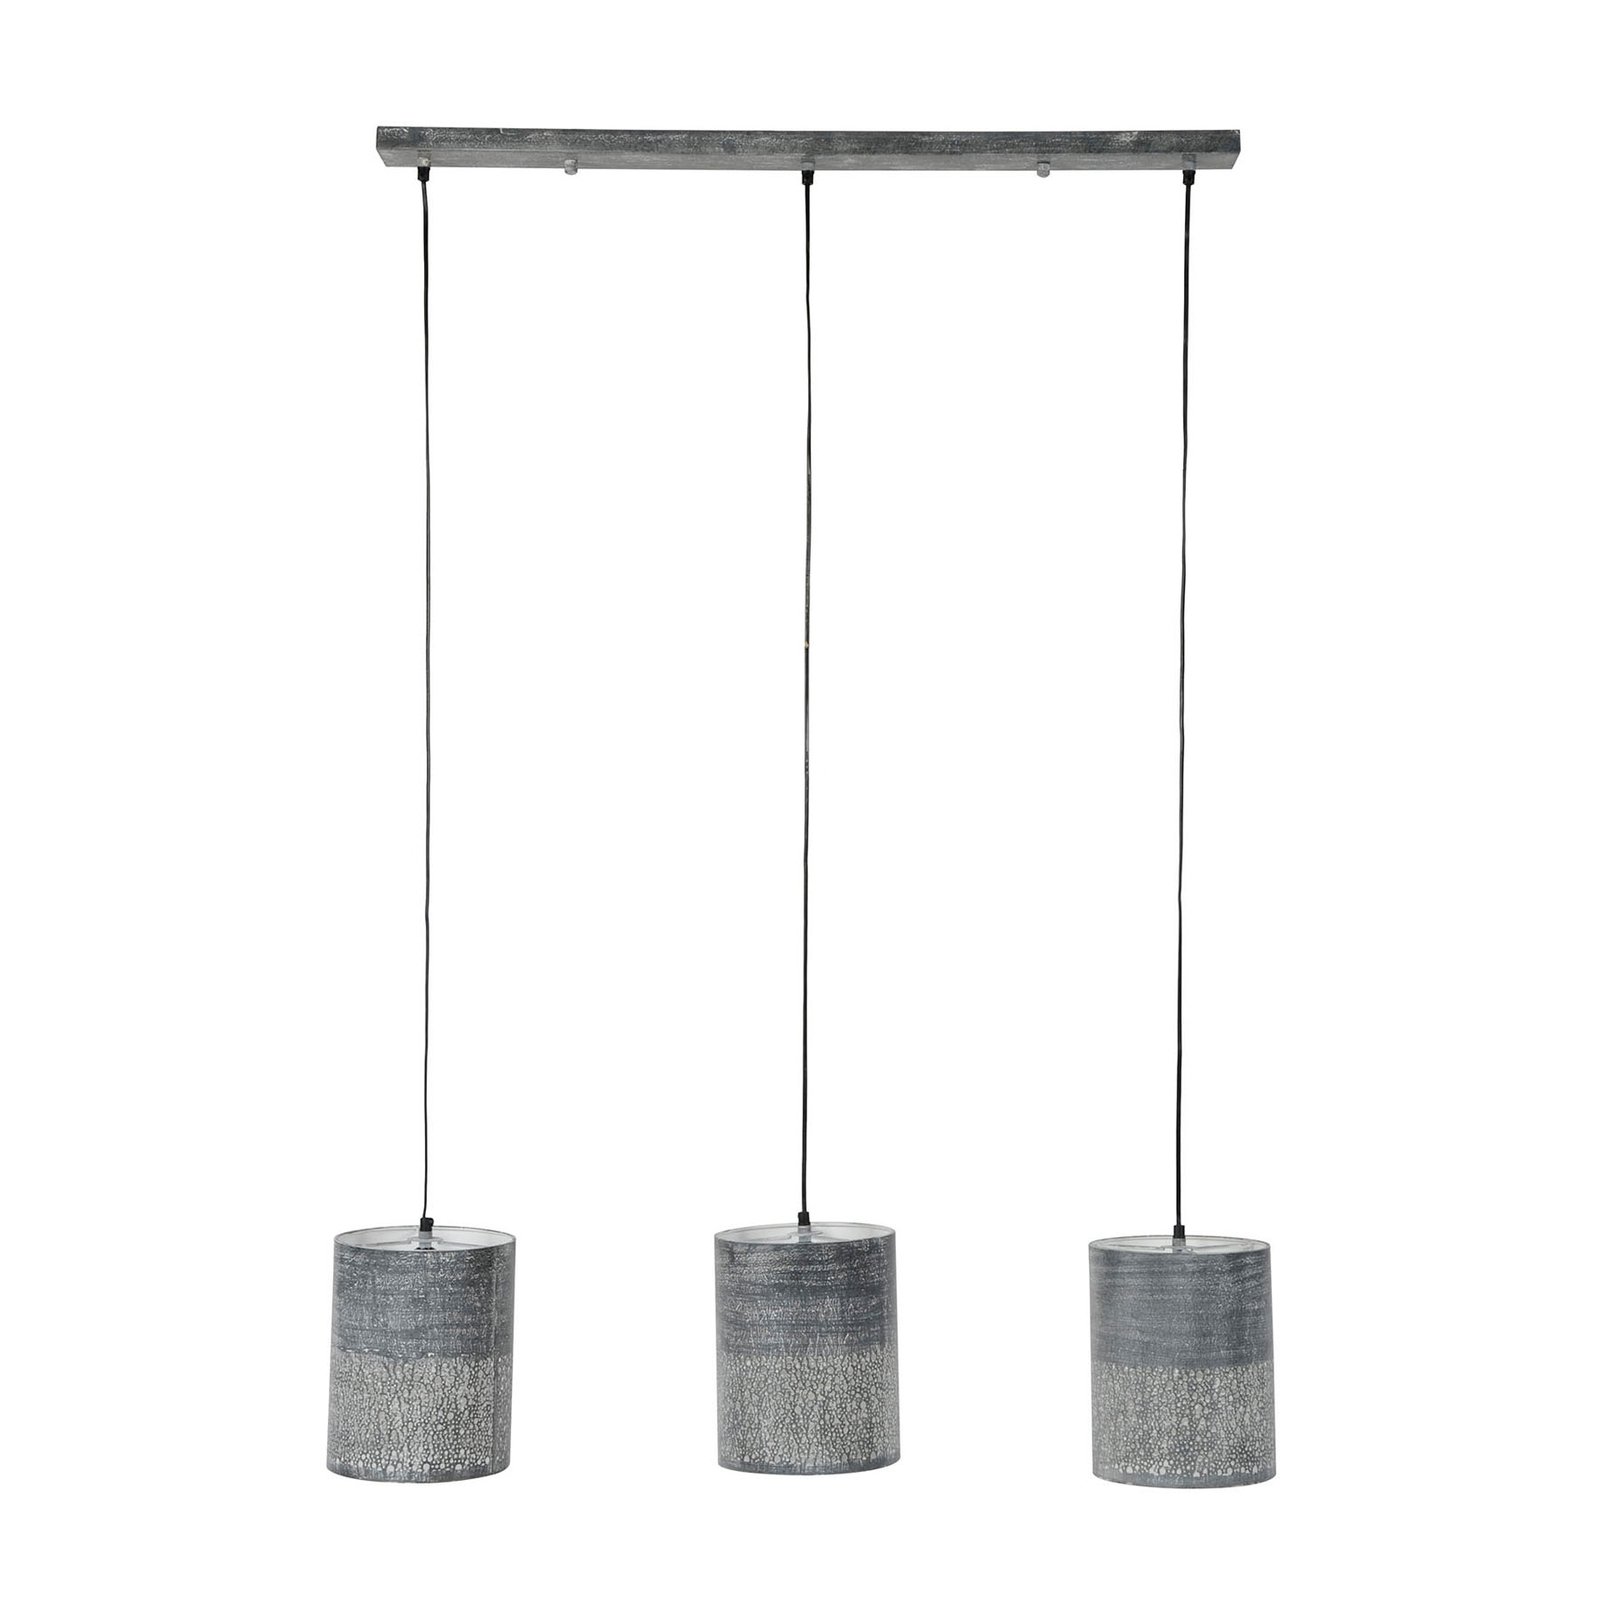 Holinder pendant light, 3-bulb, in a row